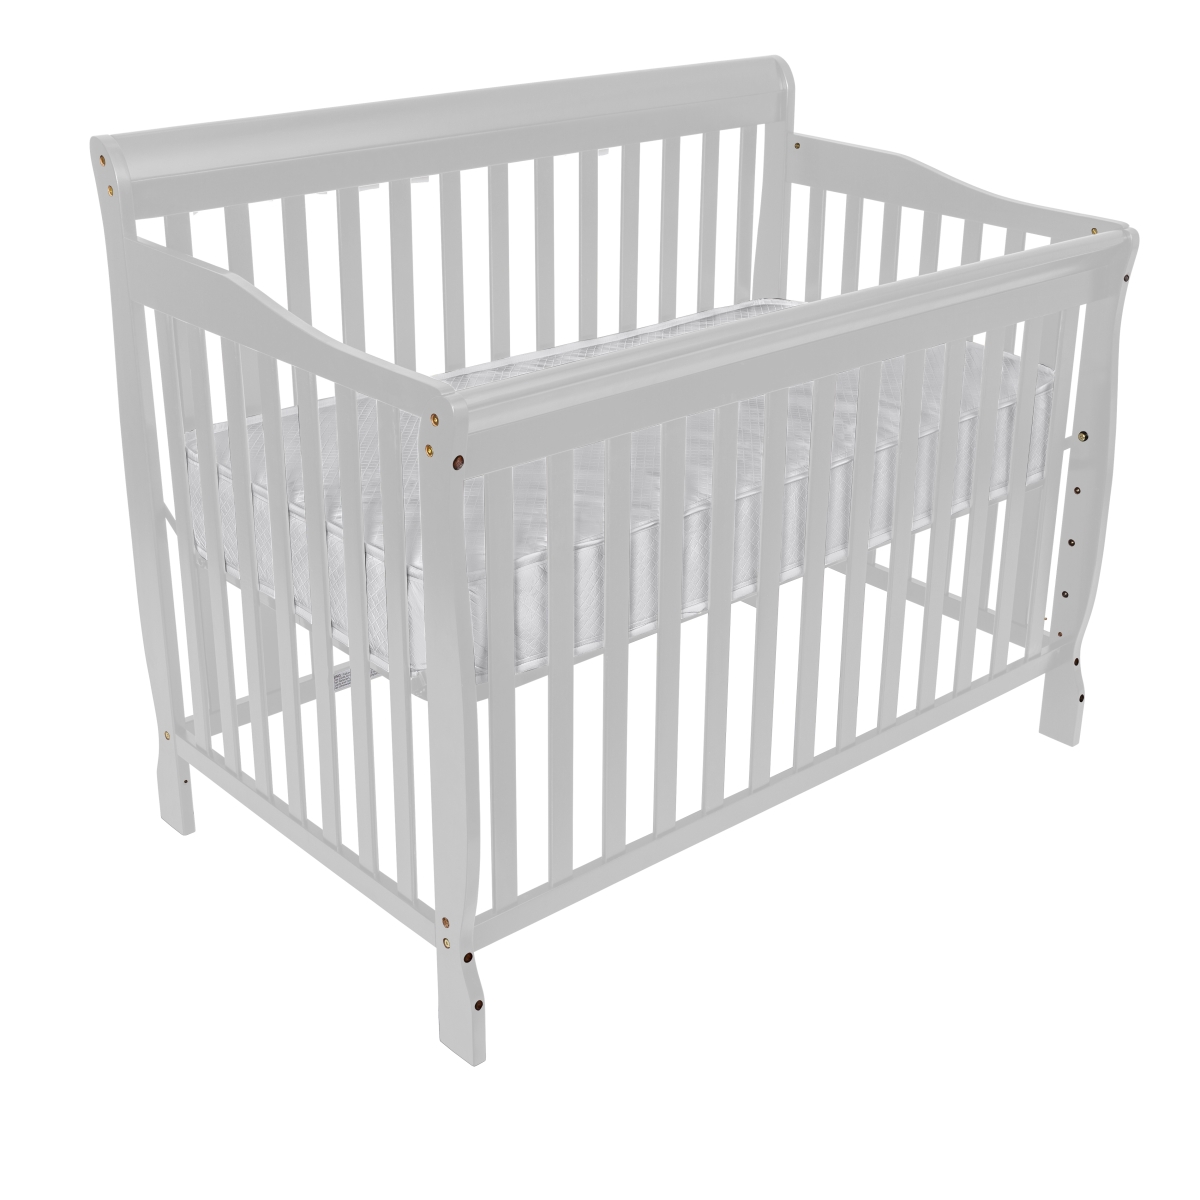 925-g 4 In 1 Crib 3 Positions, Grey - Full Size